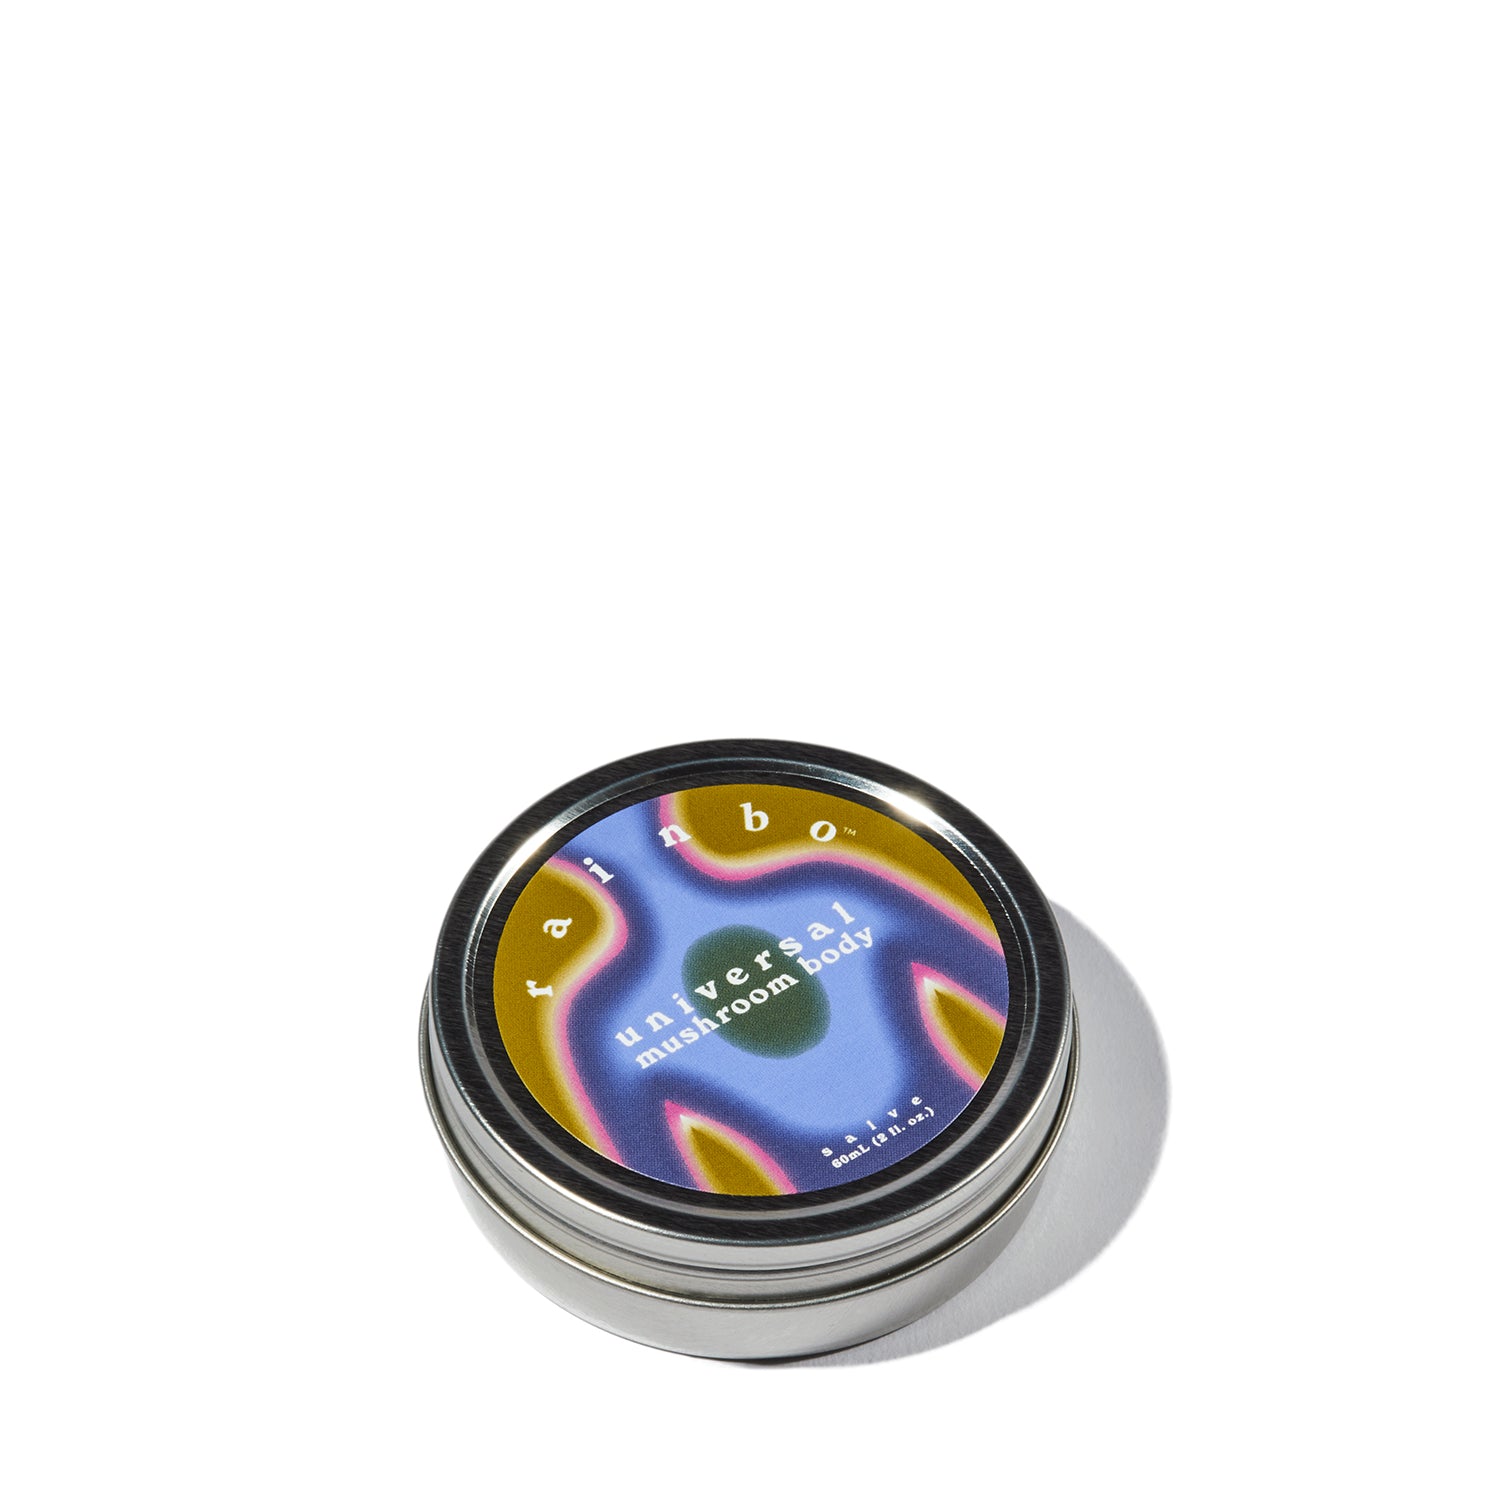 silver circular tin with colorful label that reads 'universal mushroom body'. a healing ointment and salve from rainbo.